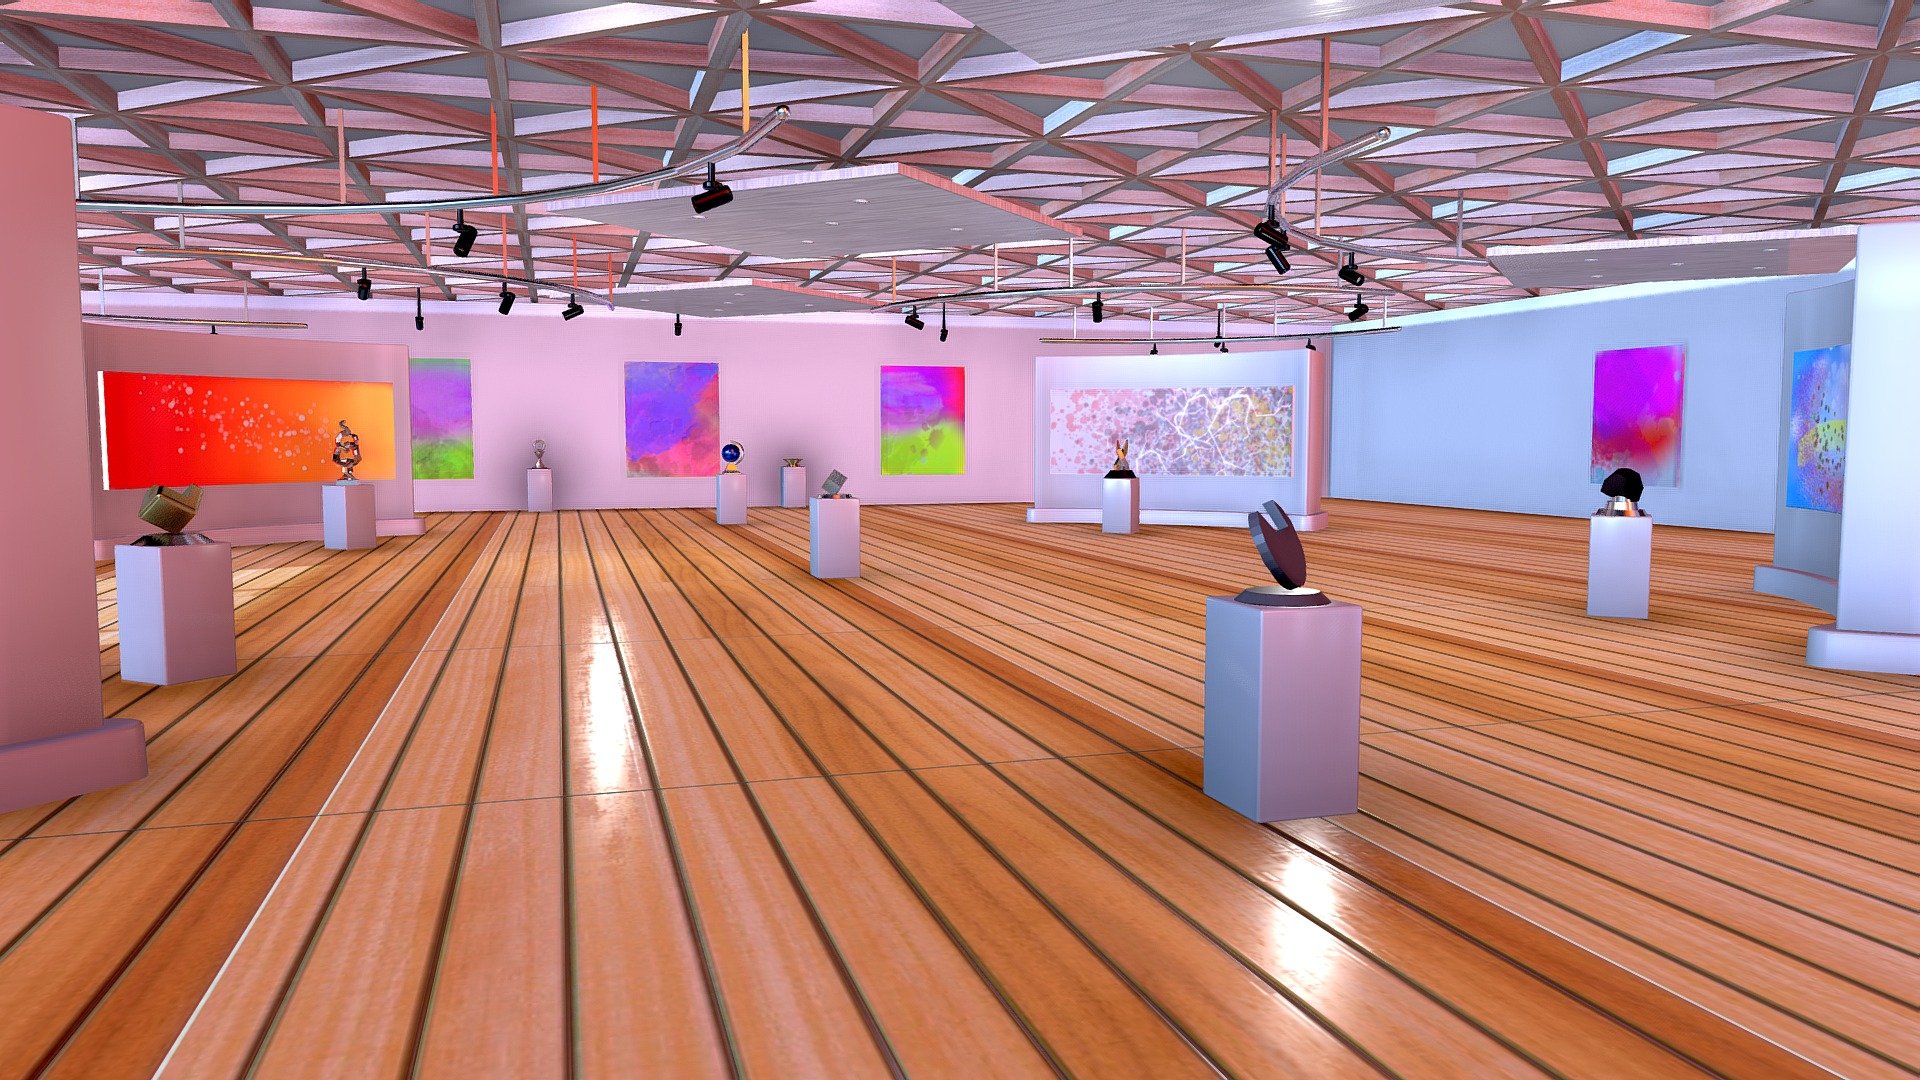 A great art gallery concept to showcase your art, NFT, Sculptures, demostrations and much more. 
-Just replace the sculptures and paintings with your own to personalize this model.
-The Lighting rig is easily ajustable.  Easily parent your own lights or use the blender model, provided in the additional zip file.
- Rotate and position the lights to your liking.

Additional file contains:
-Blender file with all the objects, textures and lighting set up.
-PBR 2048 texture sets 3d model